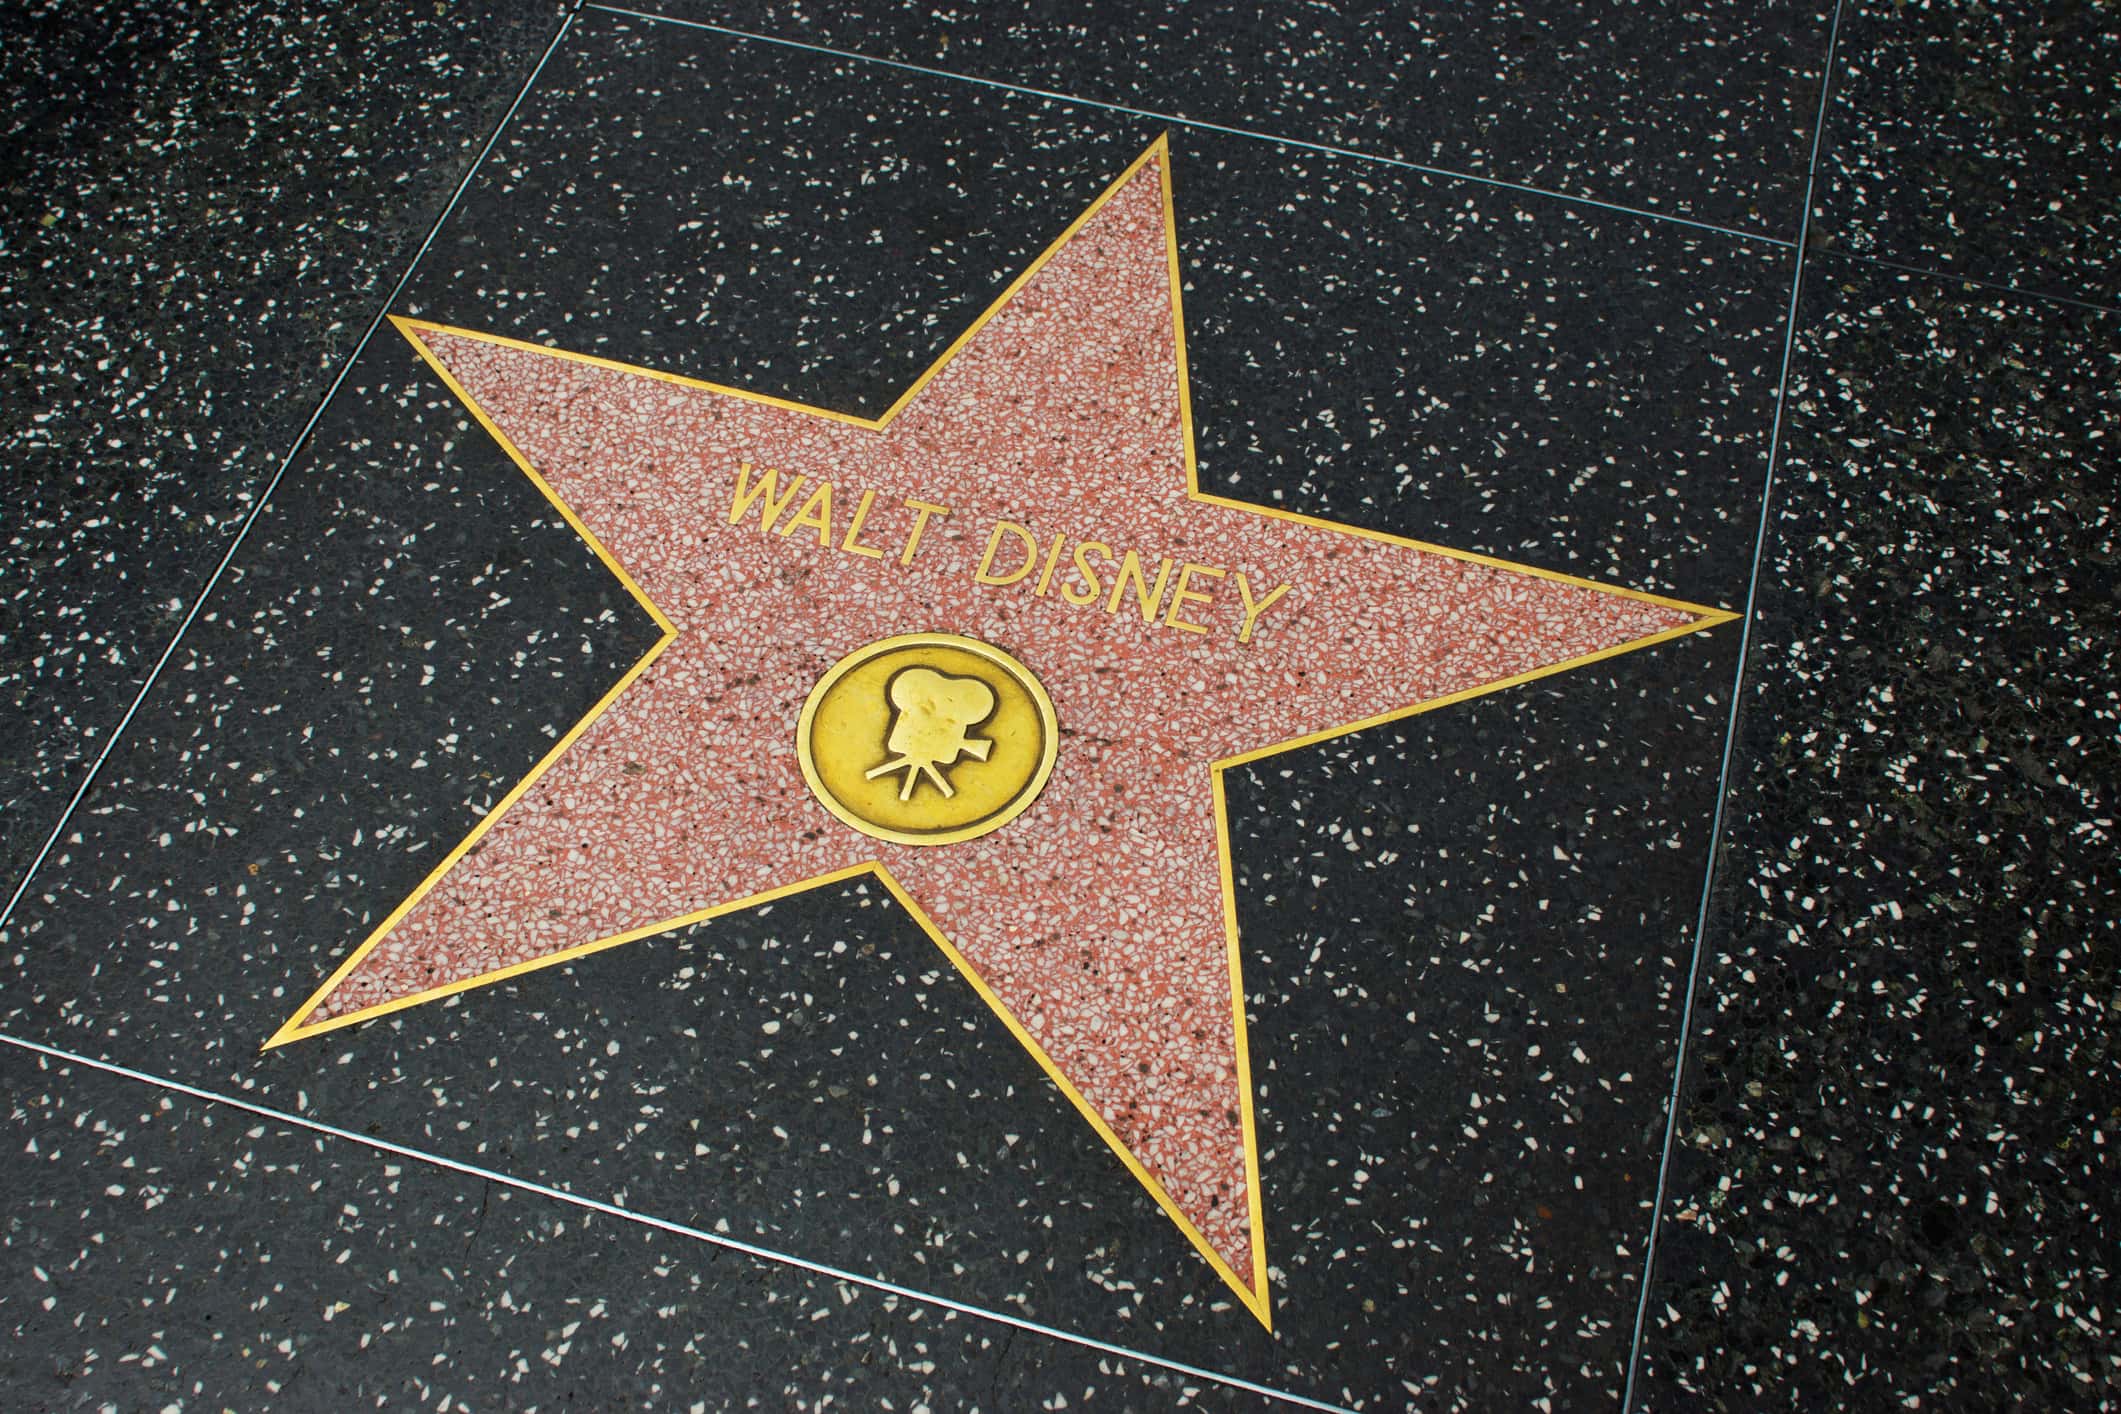 Walt Disney star on Hollywood Walk of Fame in Hollywood, California. This star is located on Hollywood Blvd. and is one of over 2000 celebrity stars embedded in the sidewalk.